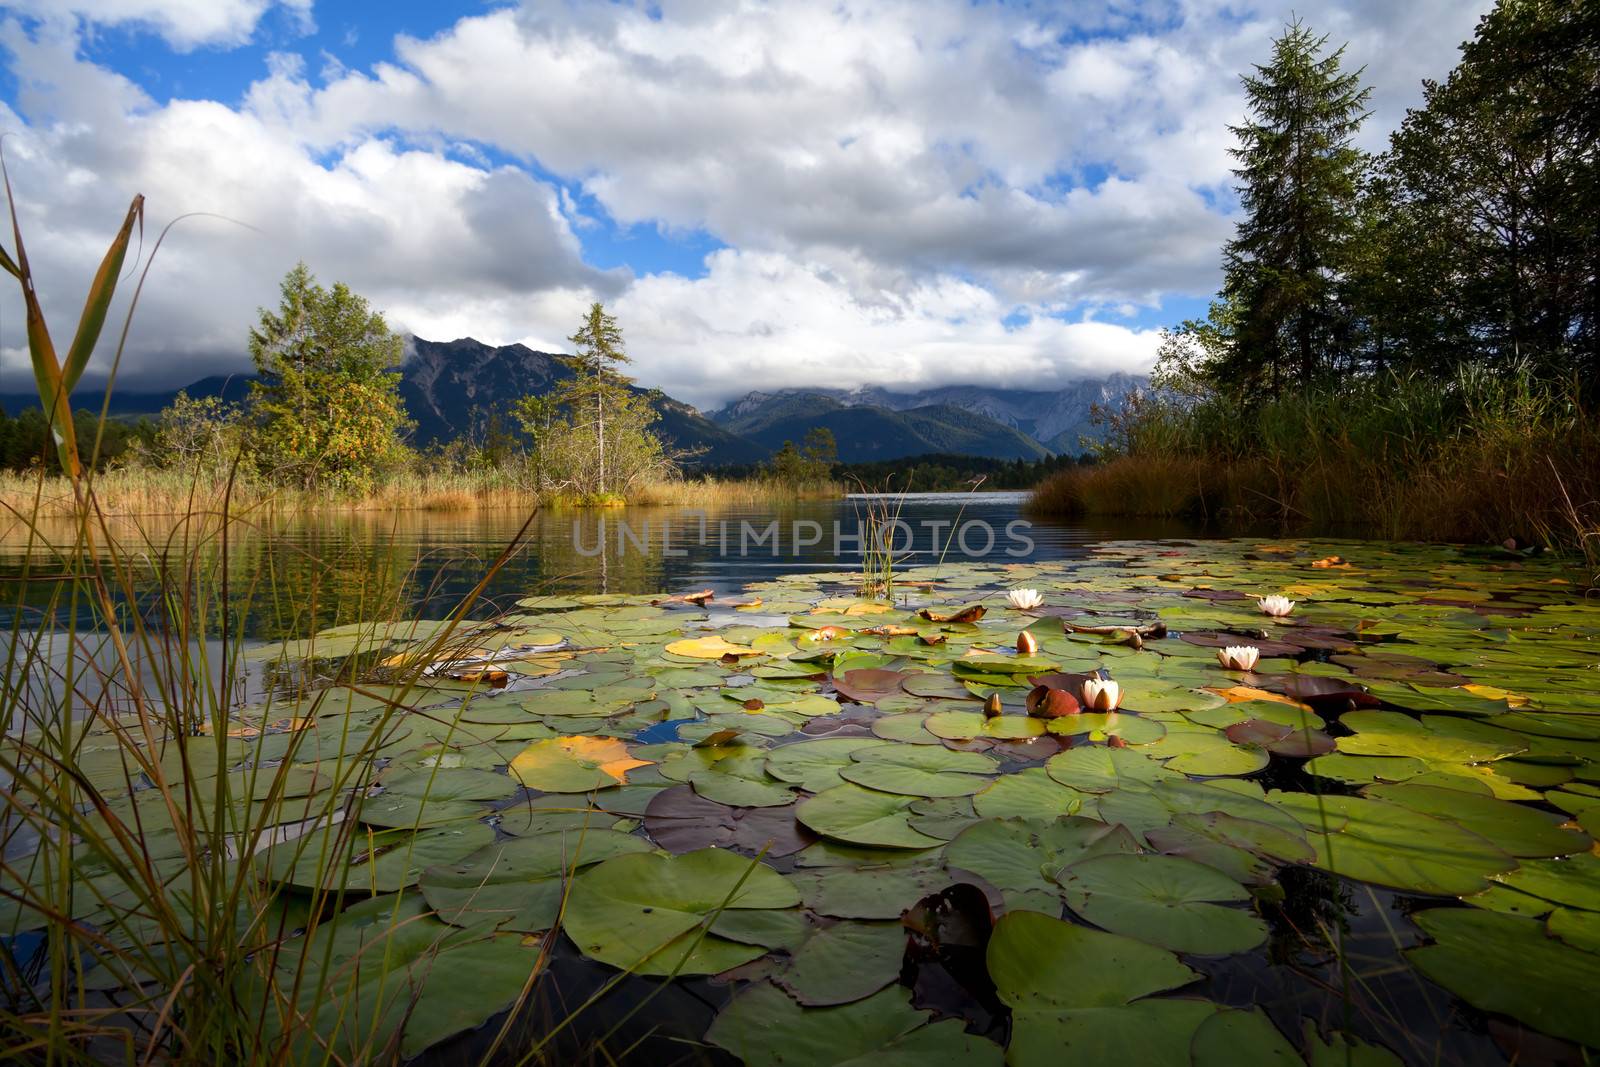 white water lily flowers on lake Barmsee, Bavarian Alps, Germany